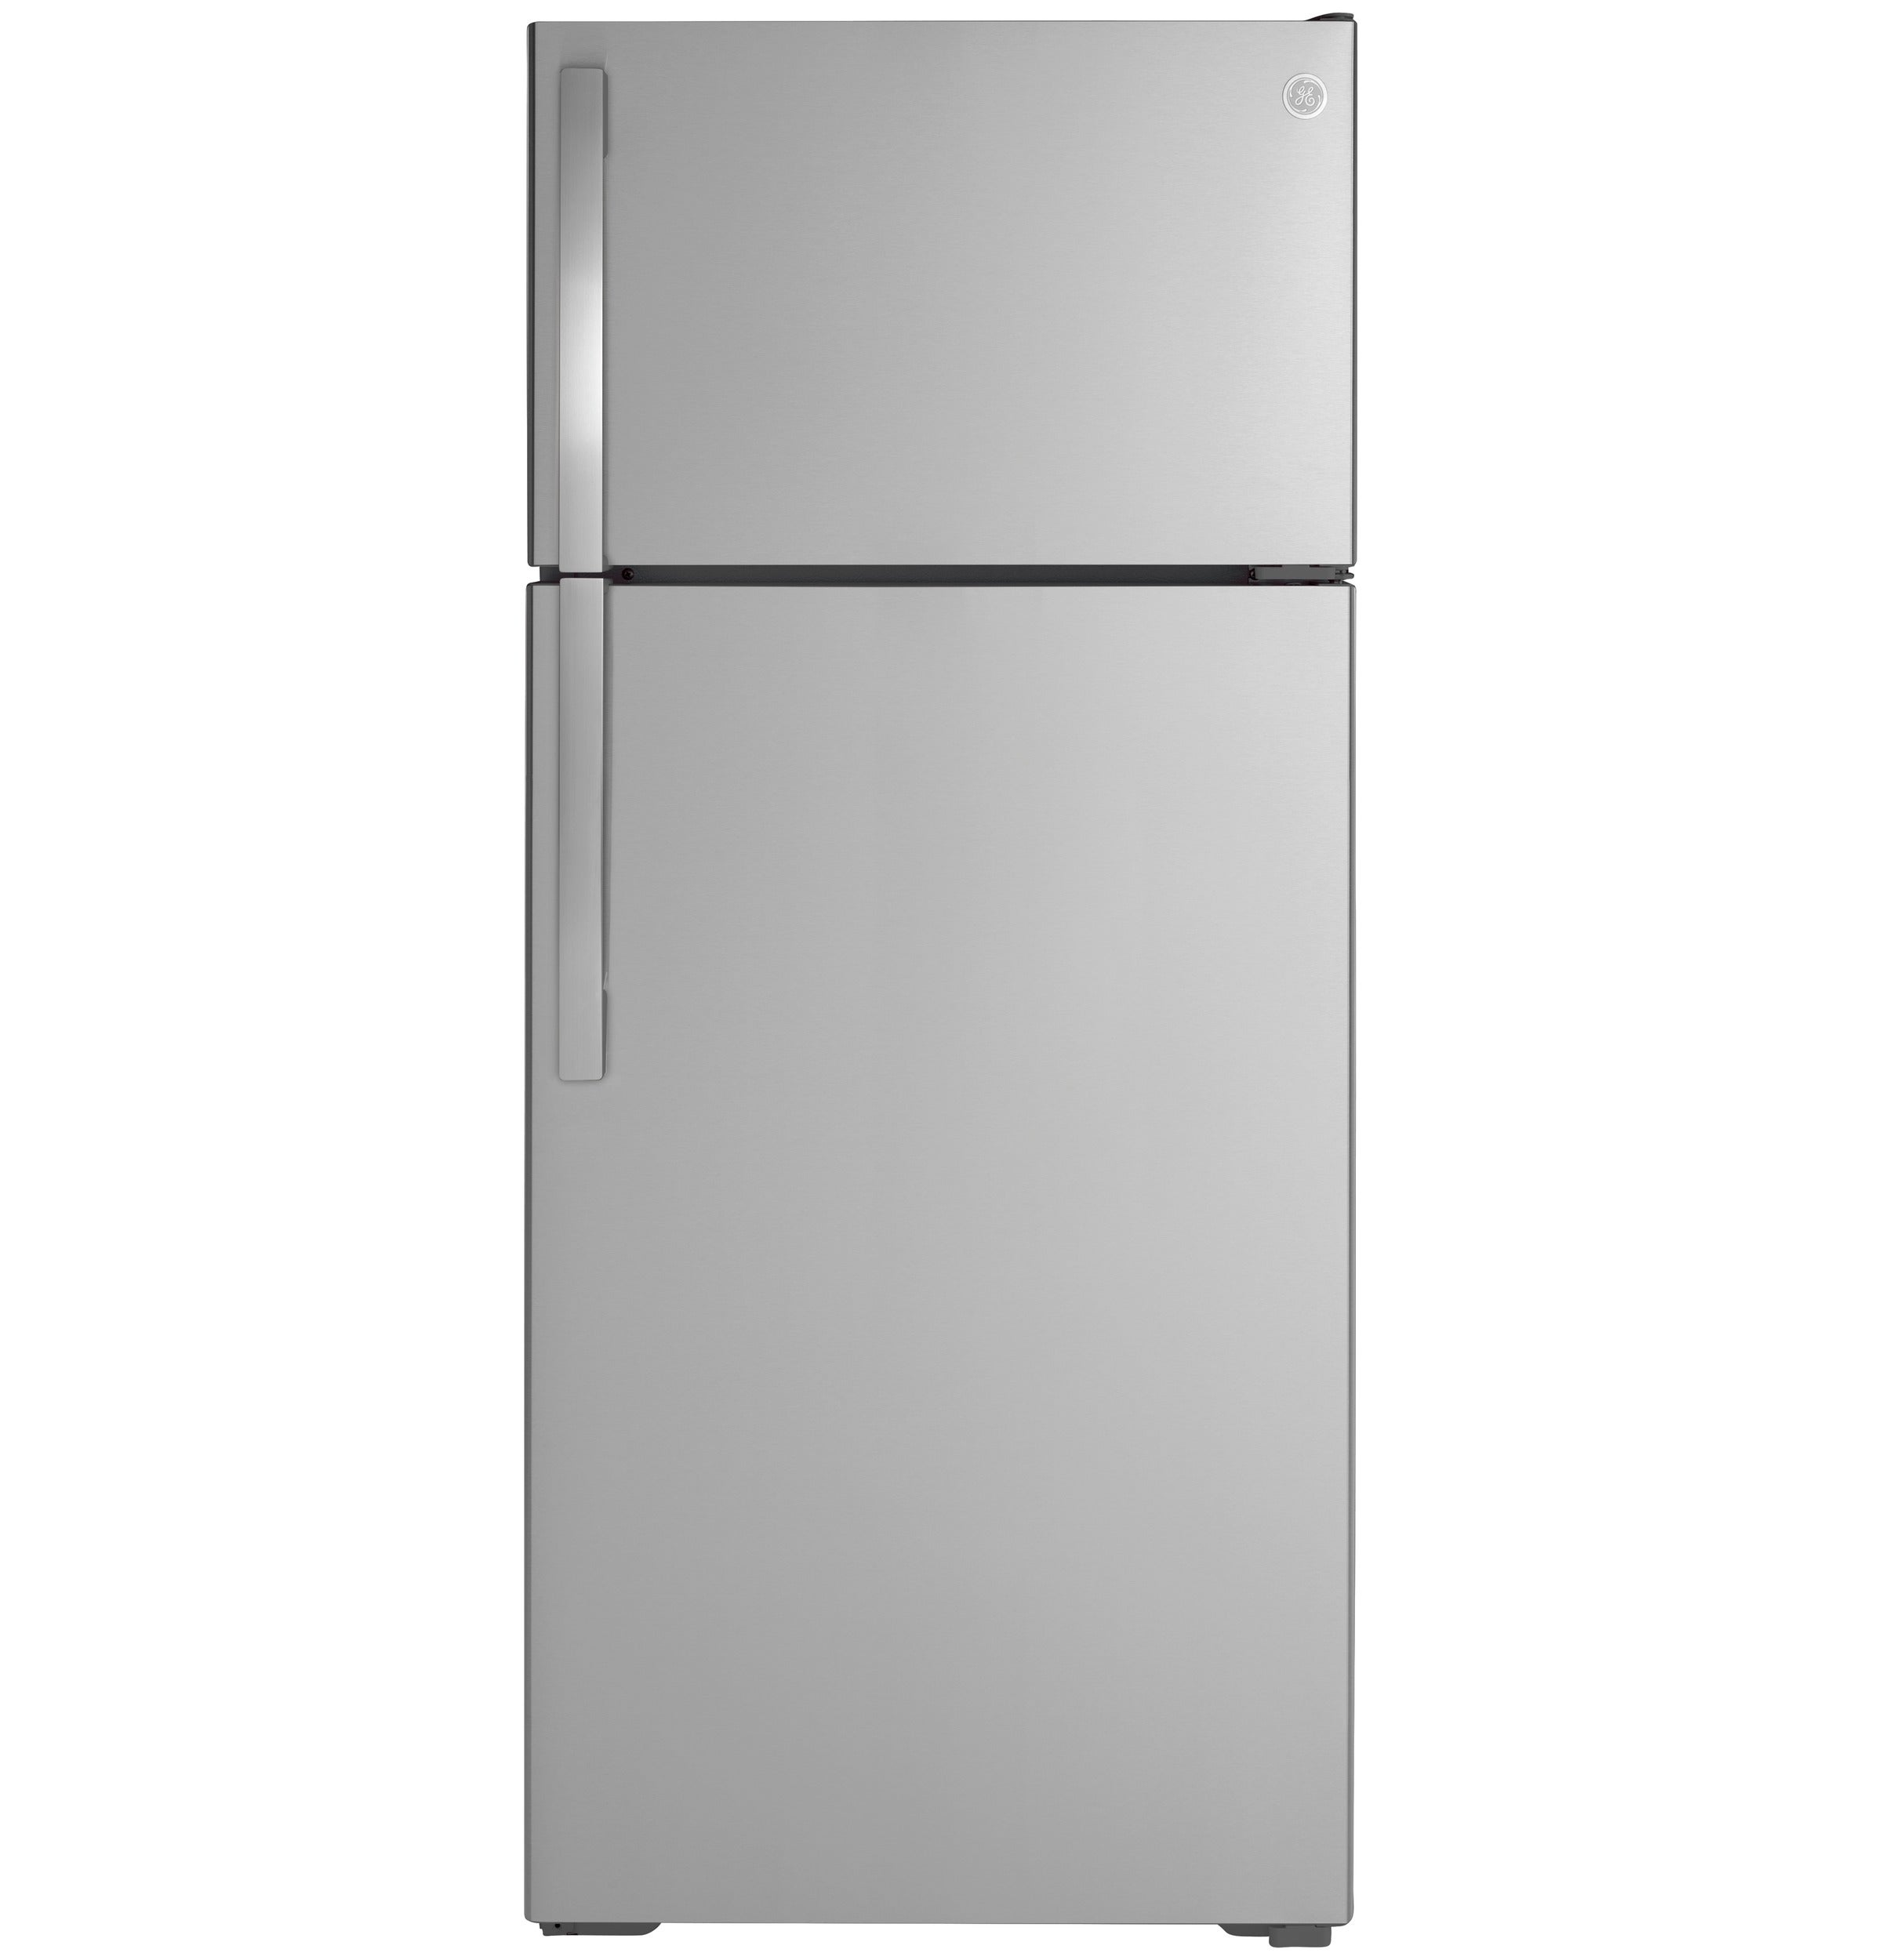 GE 17.5 cuft Stainless Top Mount Refrigerator